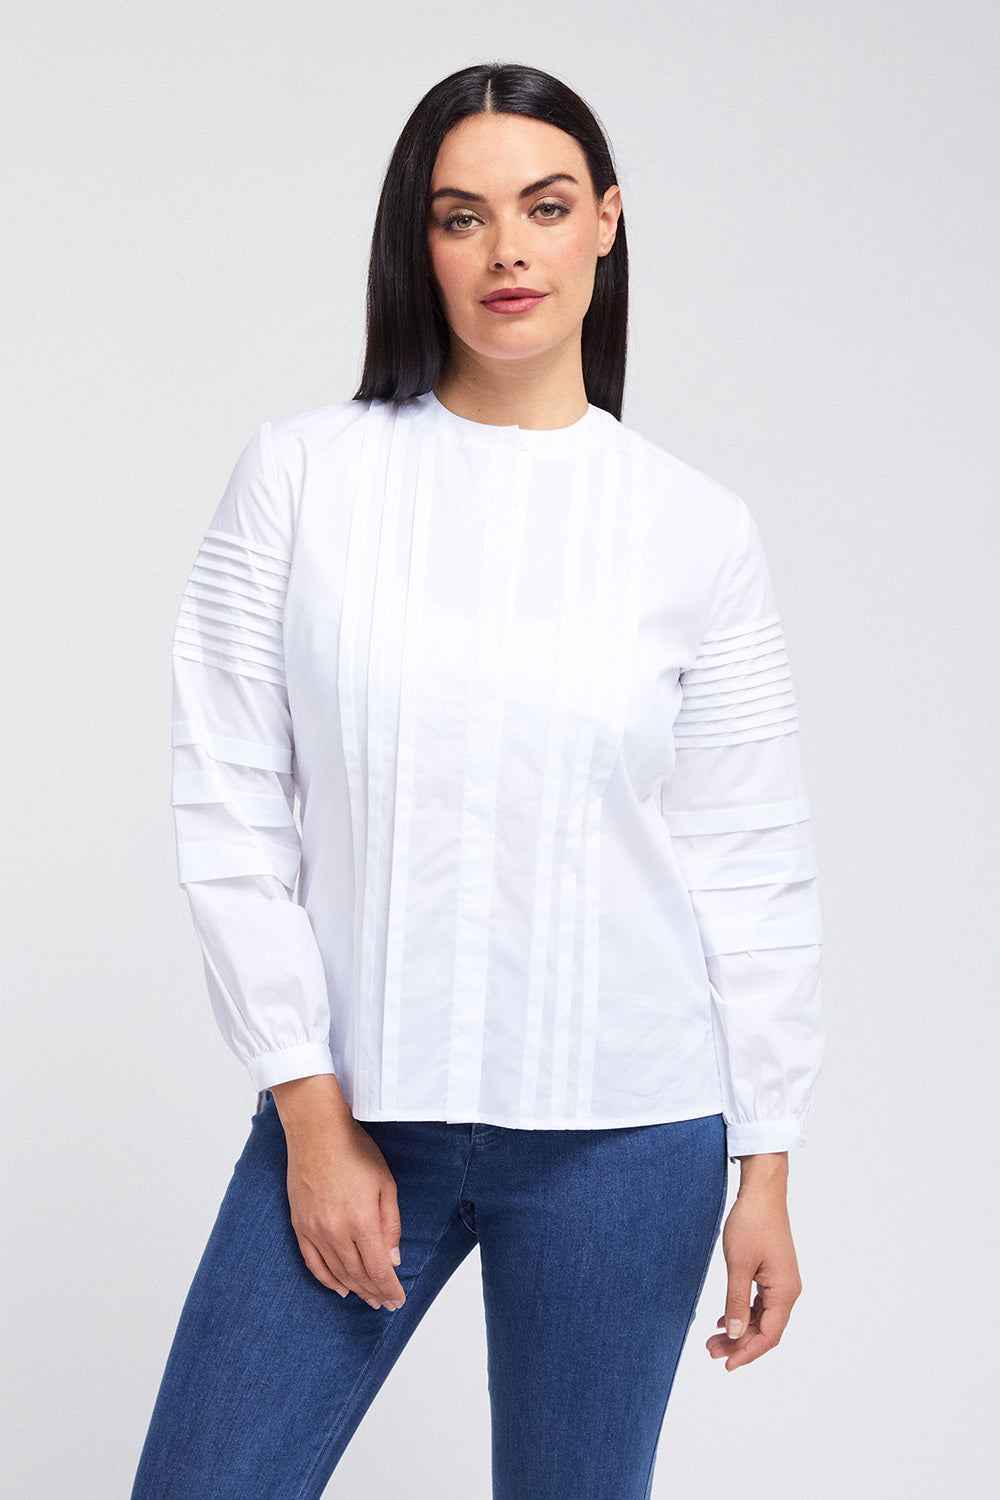 Italy Crew Neck Shirt w/ Pleating: FINAL SALE